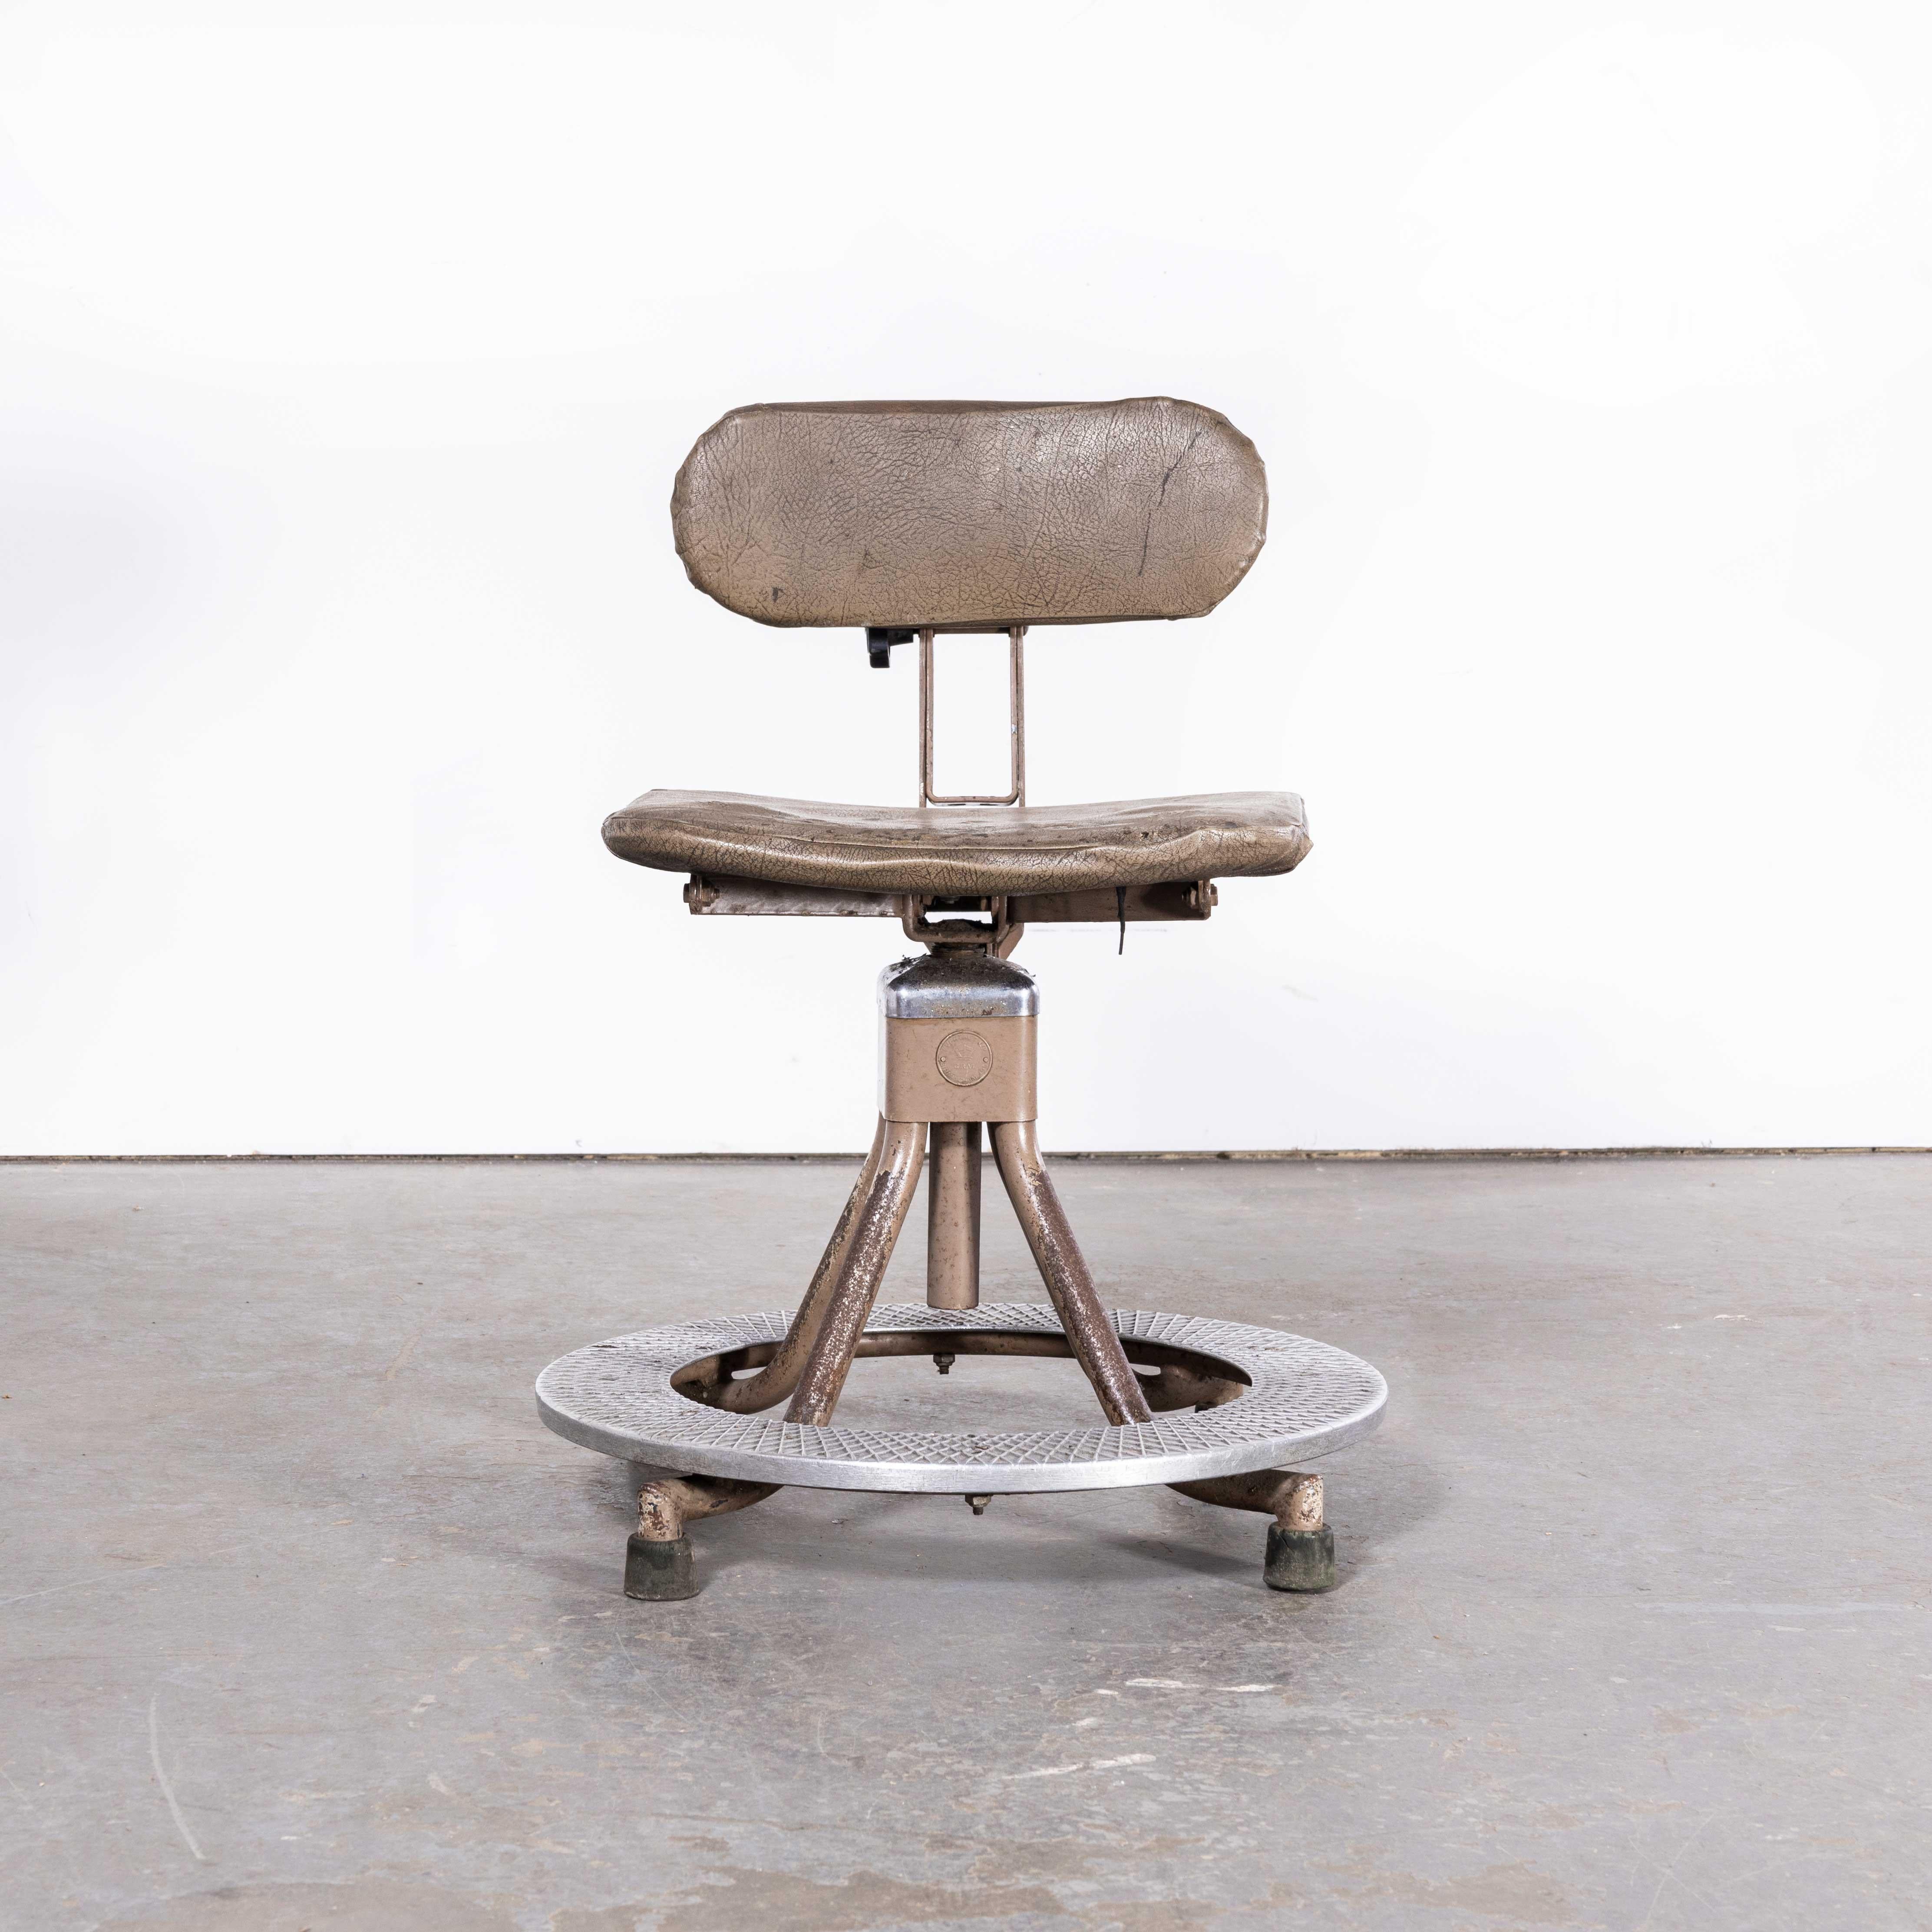 1950s Evertaut Original Machinists Chair – With Foot Support (2517)
1950s Evertaut Original Machinists Chair – With Foot Support. In it’s heyday Evertaut was the British competitor to Tolix, Multipl’s and Fibrocit. This chair is one of their iconic